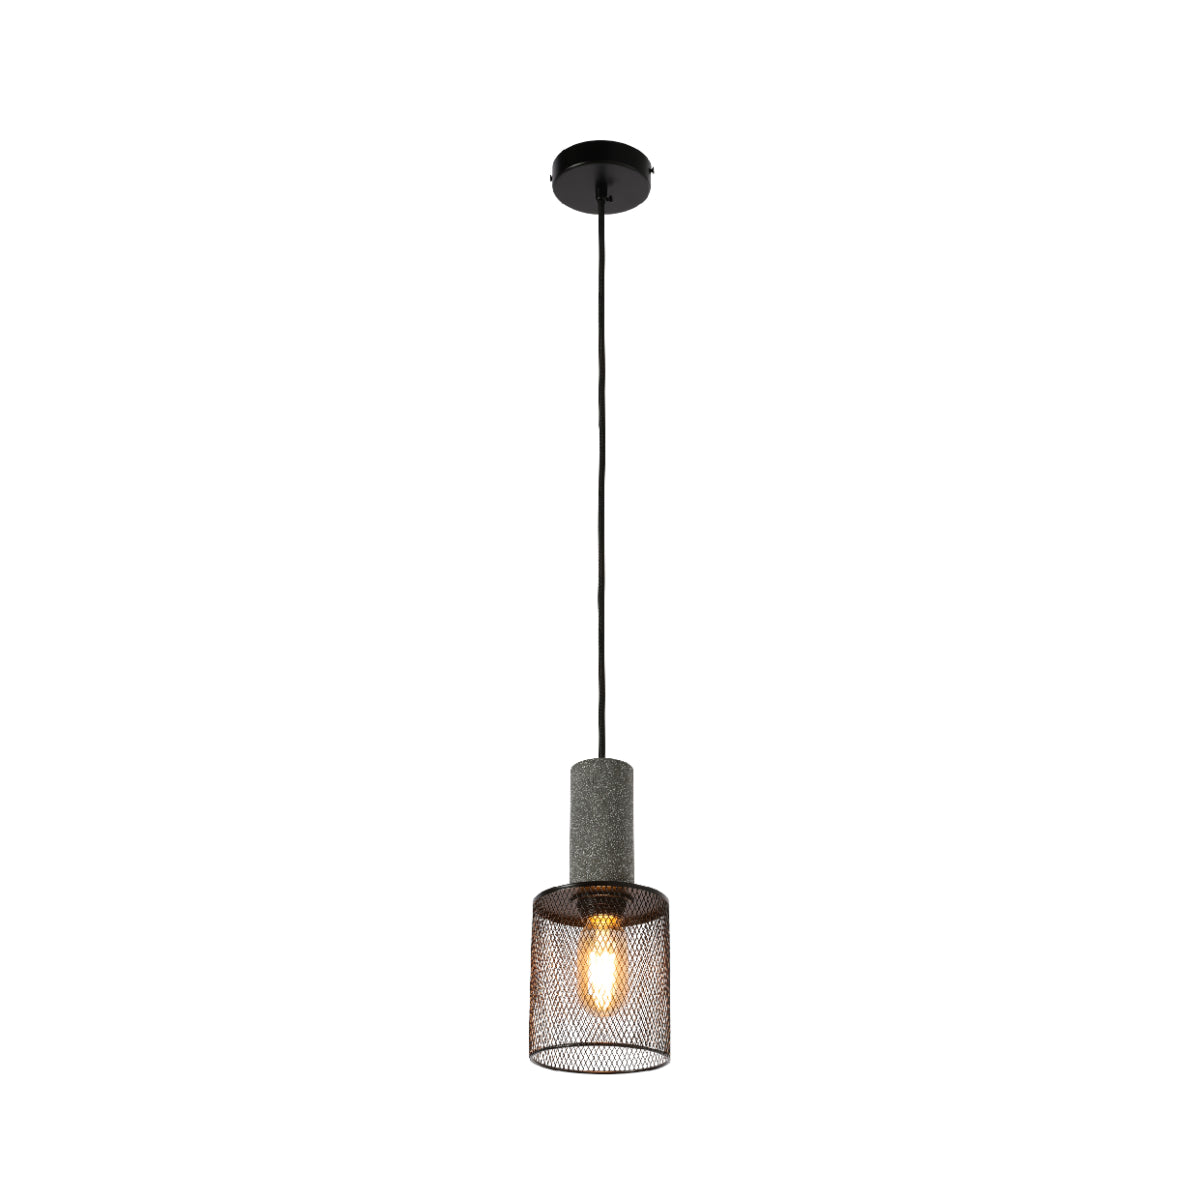 Main image of Quartet of Textured Concrete Pendant Lights with Metal Shades - TEKLED 150-19056